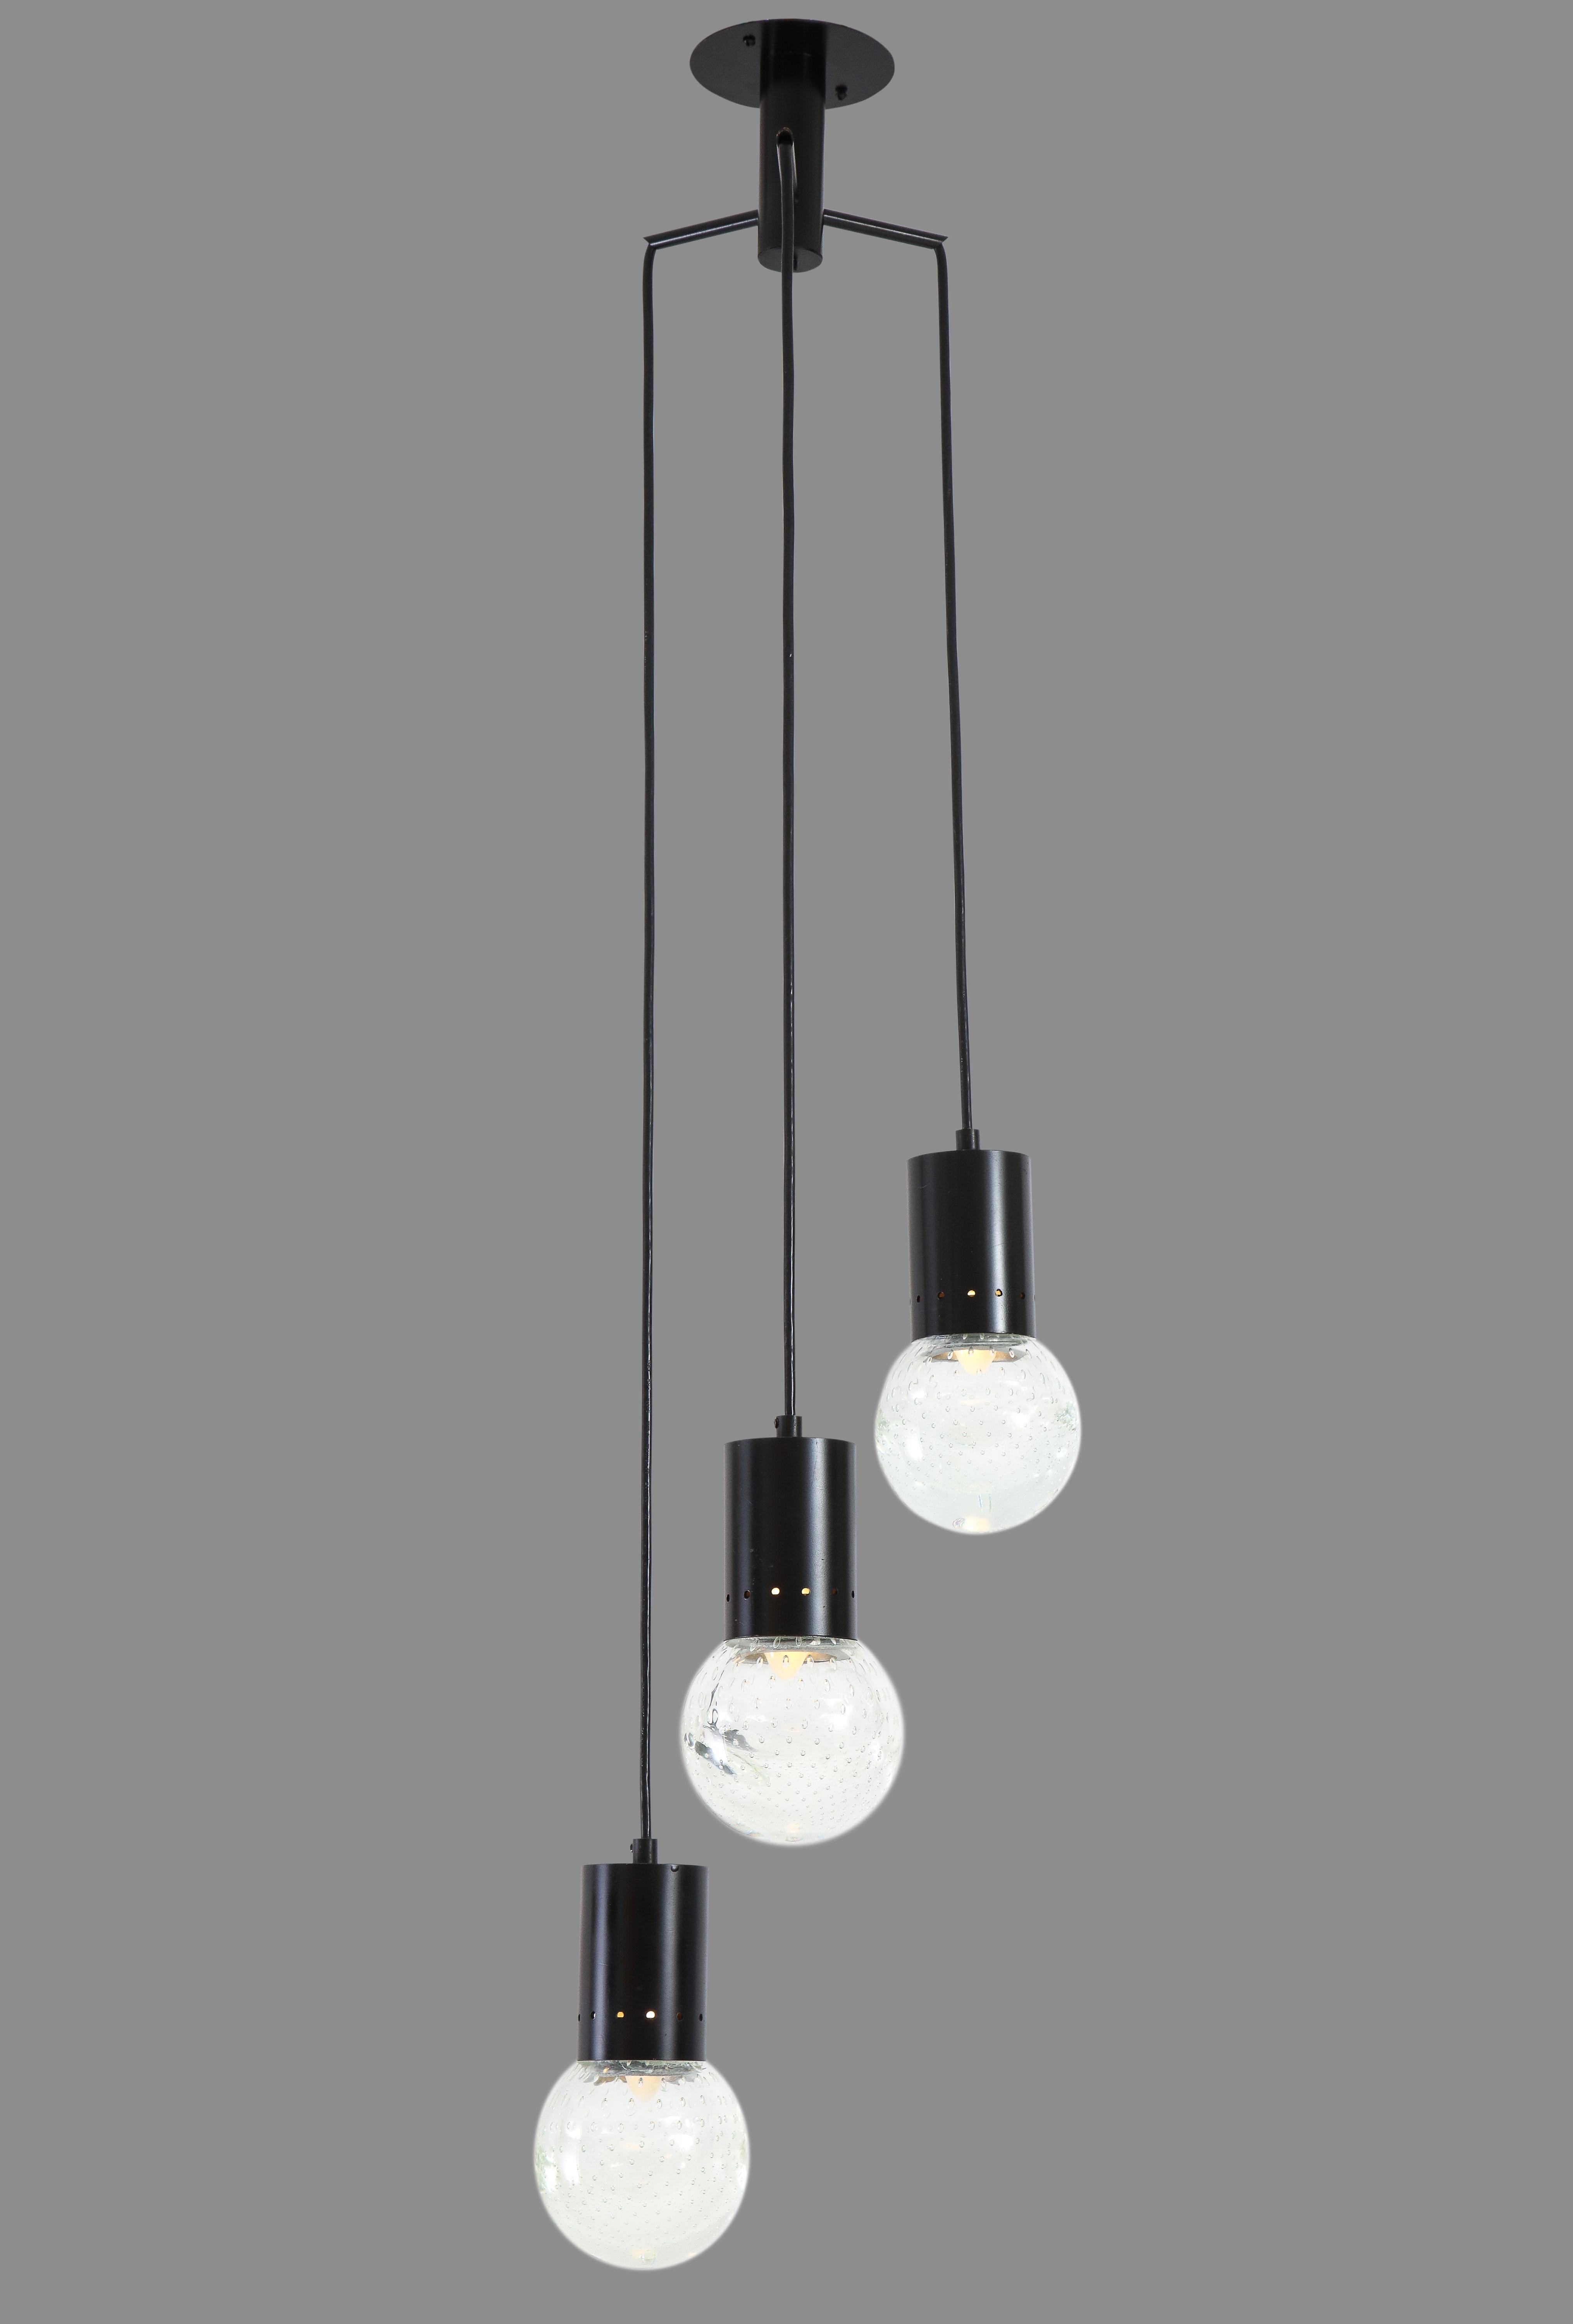 Gino Sarfatti for Arteluce pendant chandelier with three glass globe lights hung on black perforated enameled metal structures suspended from three-arm canopy. The glass globes are by Archemide Seguso using the Bullicante technique involving the